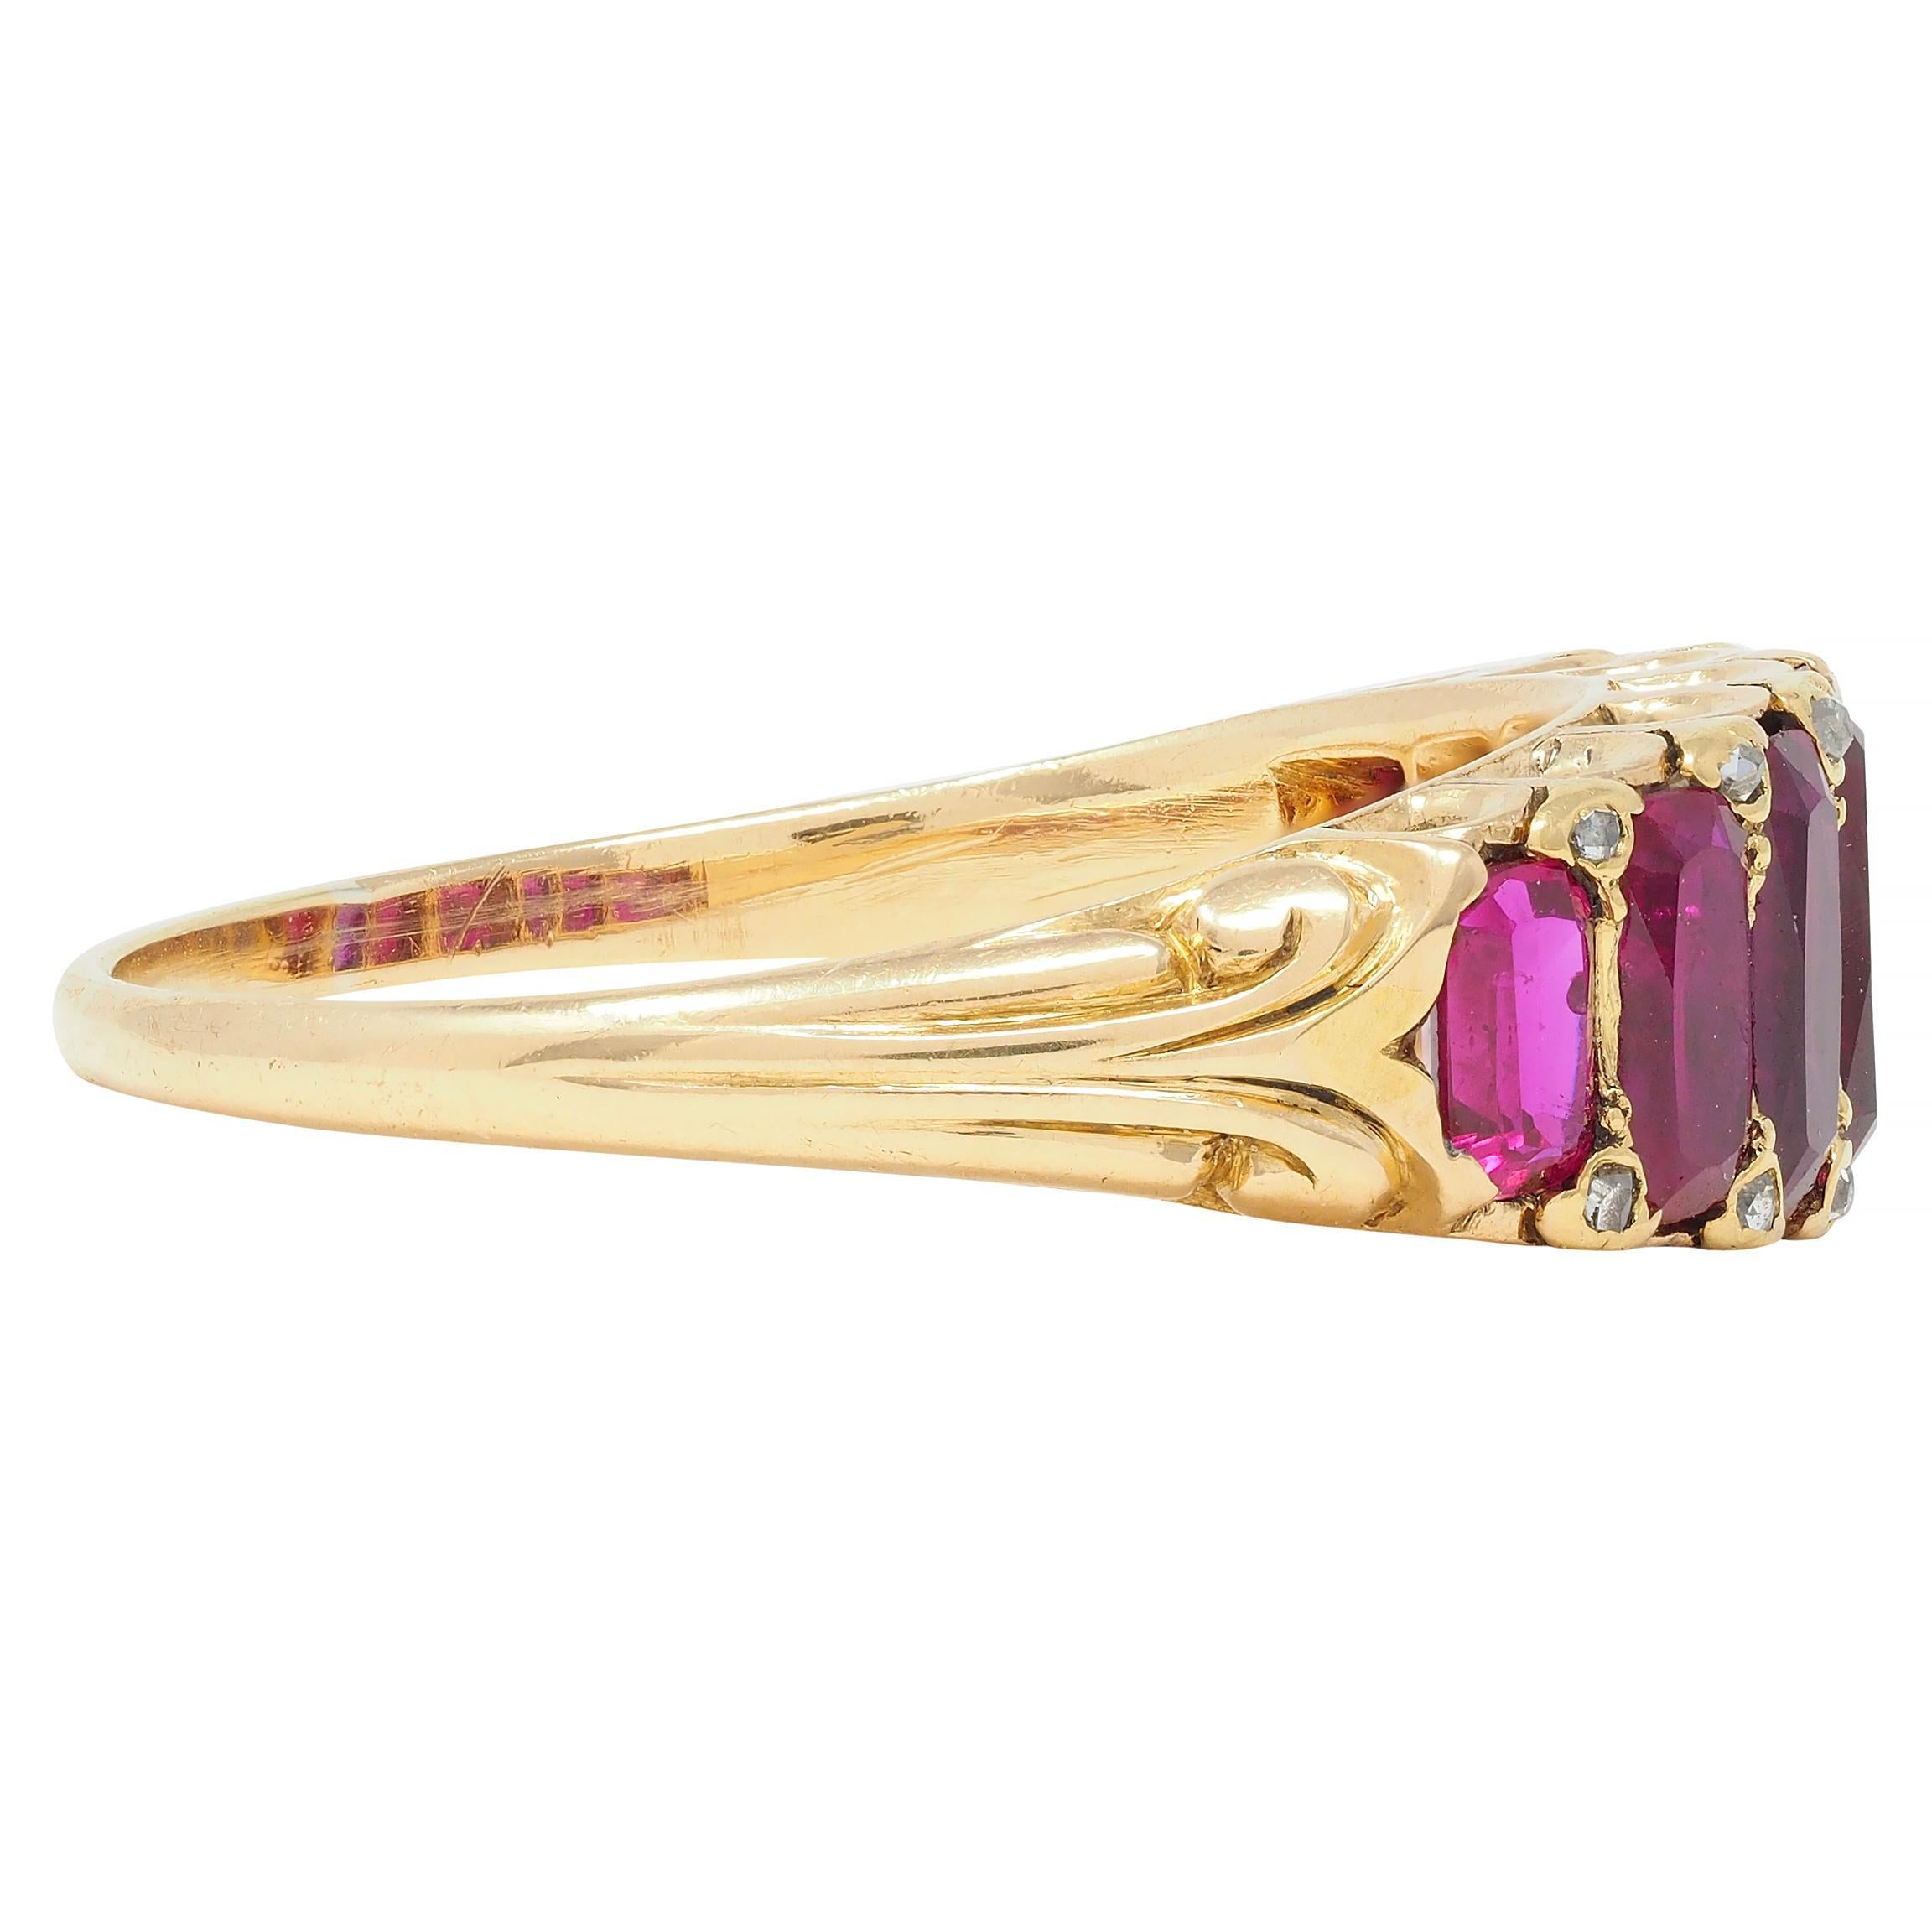 Victorian 2.88 CTW No Heat Burma Ruby Diamond 18 Karat Yellow Gold Band Ring GIA In Excellent Condition For Sale In Philadelphia, PA